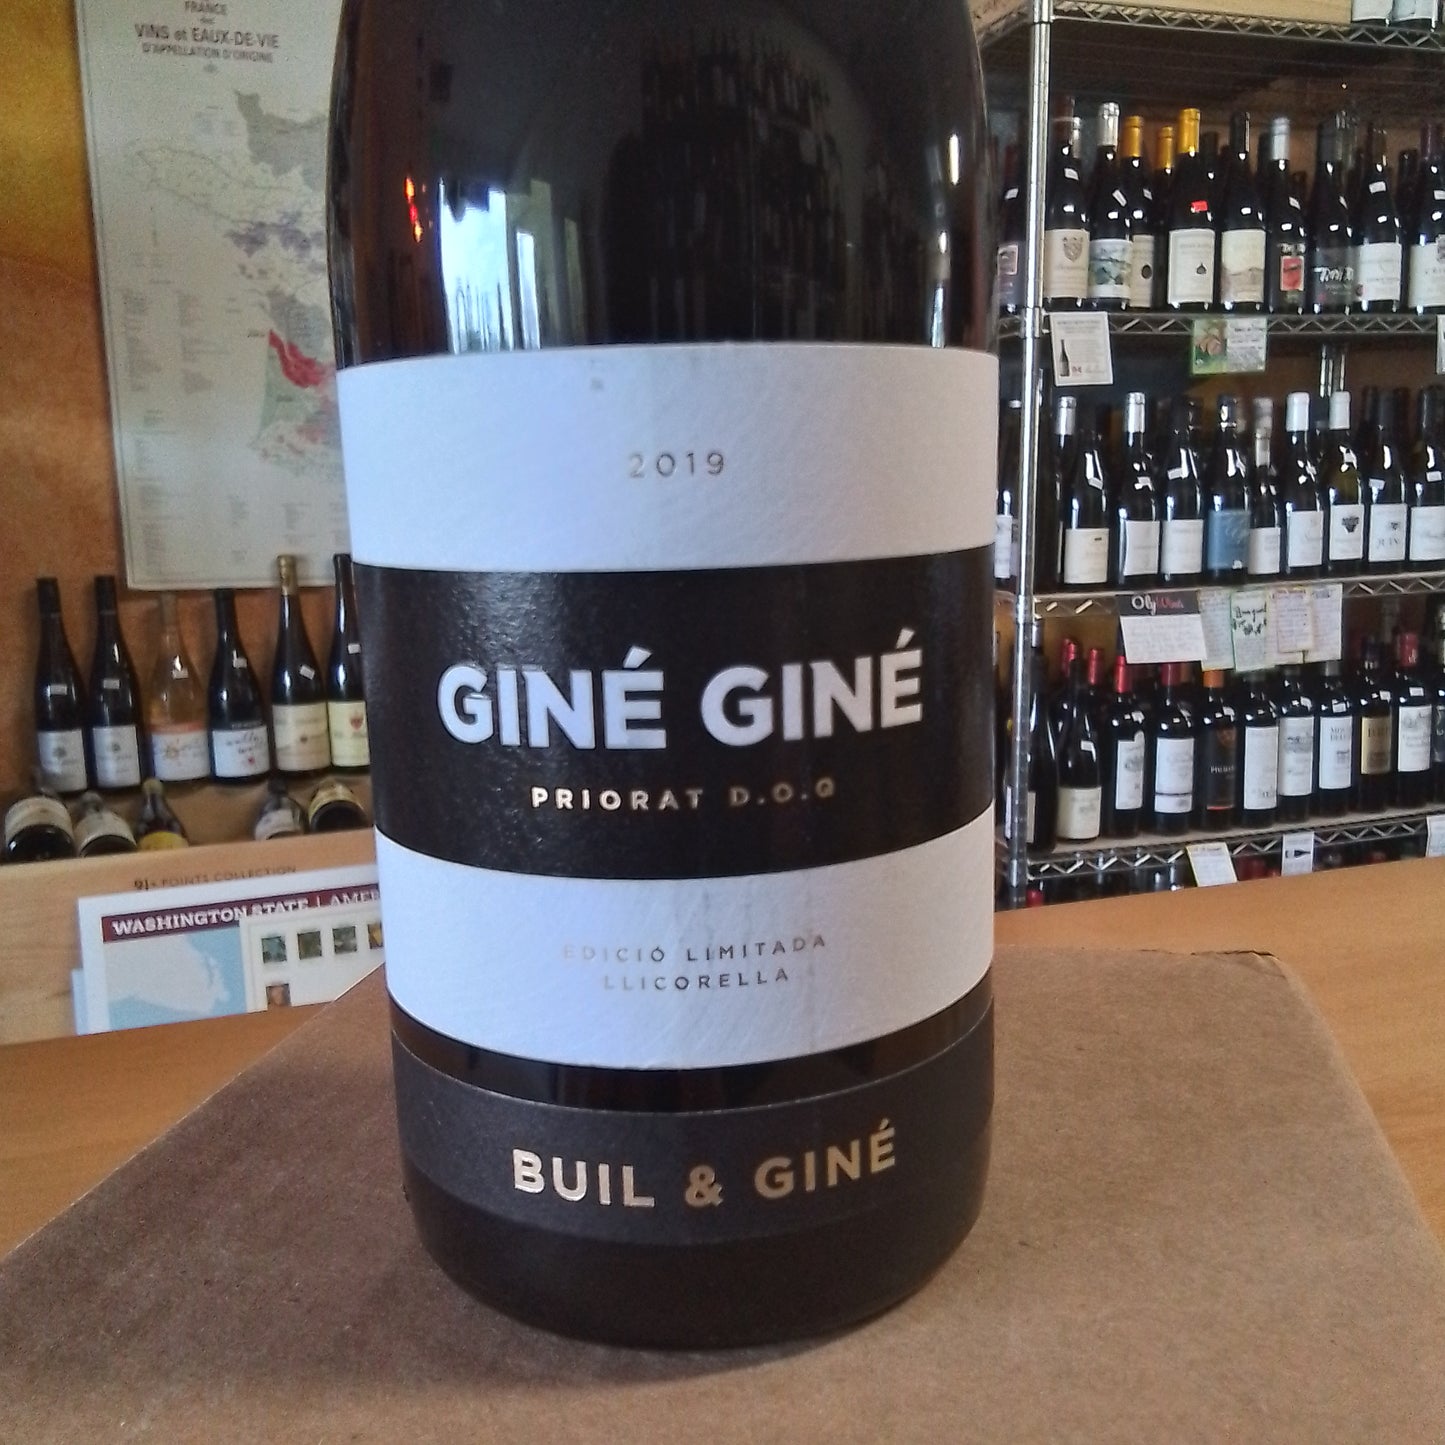 BUIL & GINE 2019 Red Blend 'Gine Gine' (Priorat, Spain)